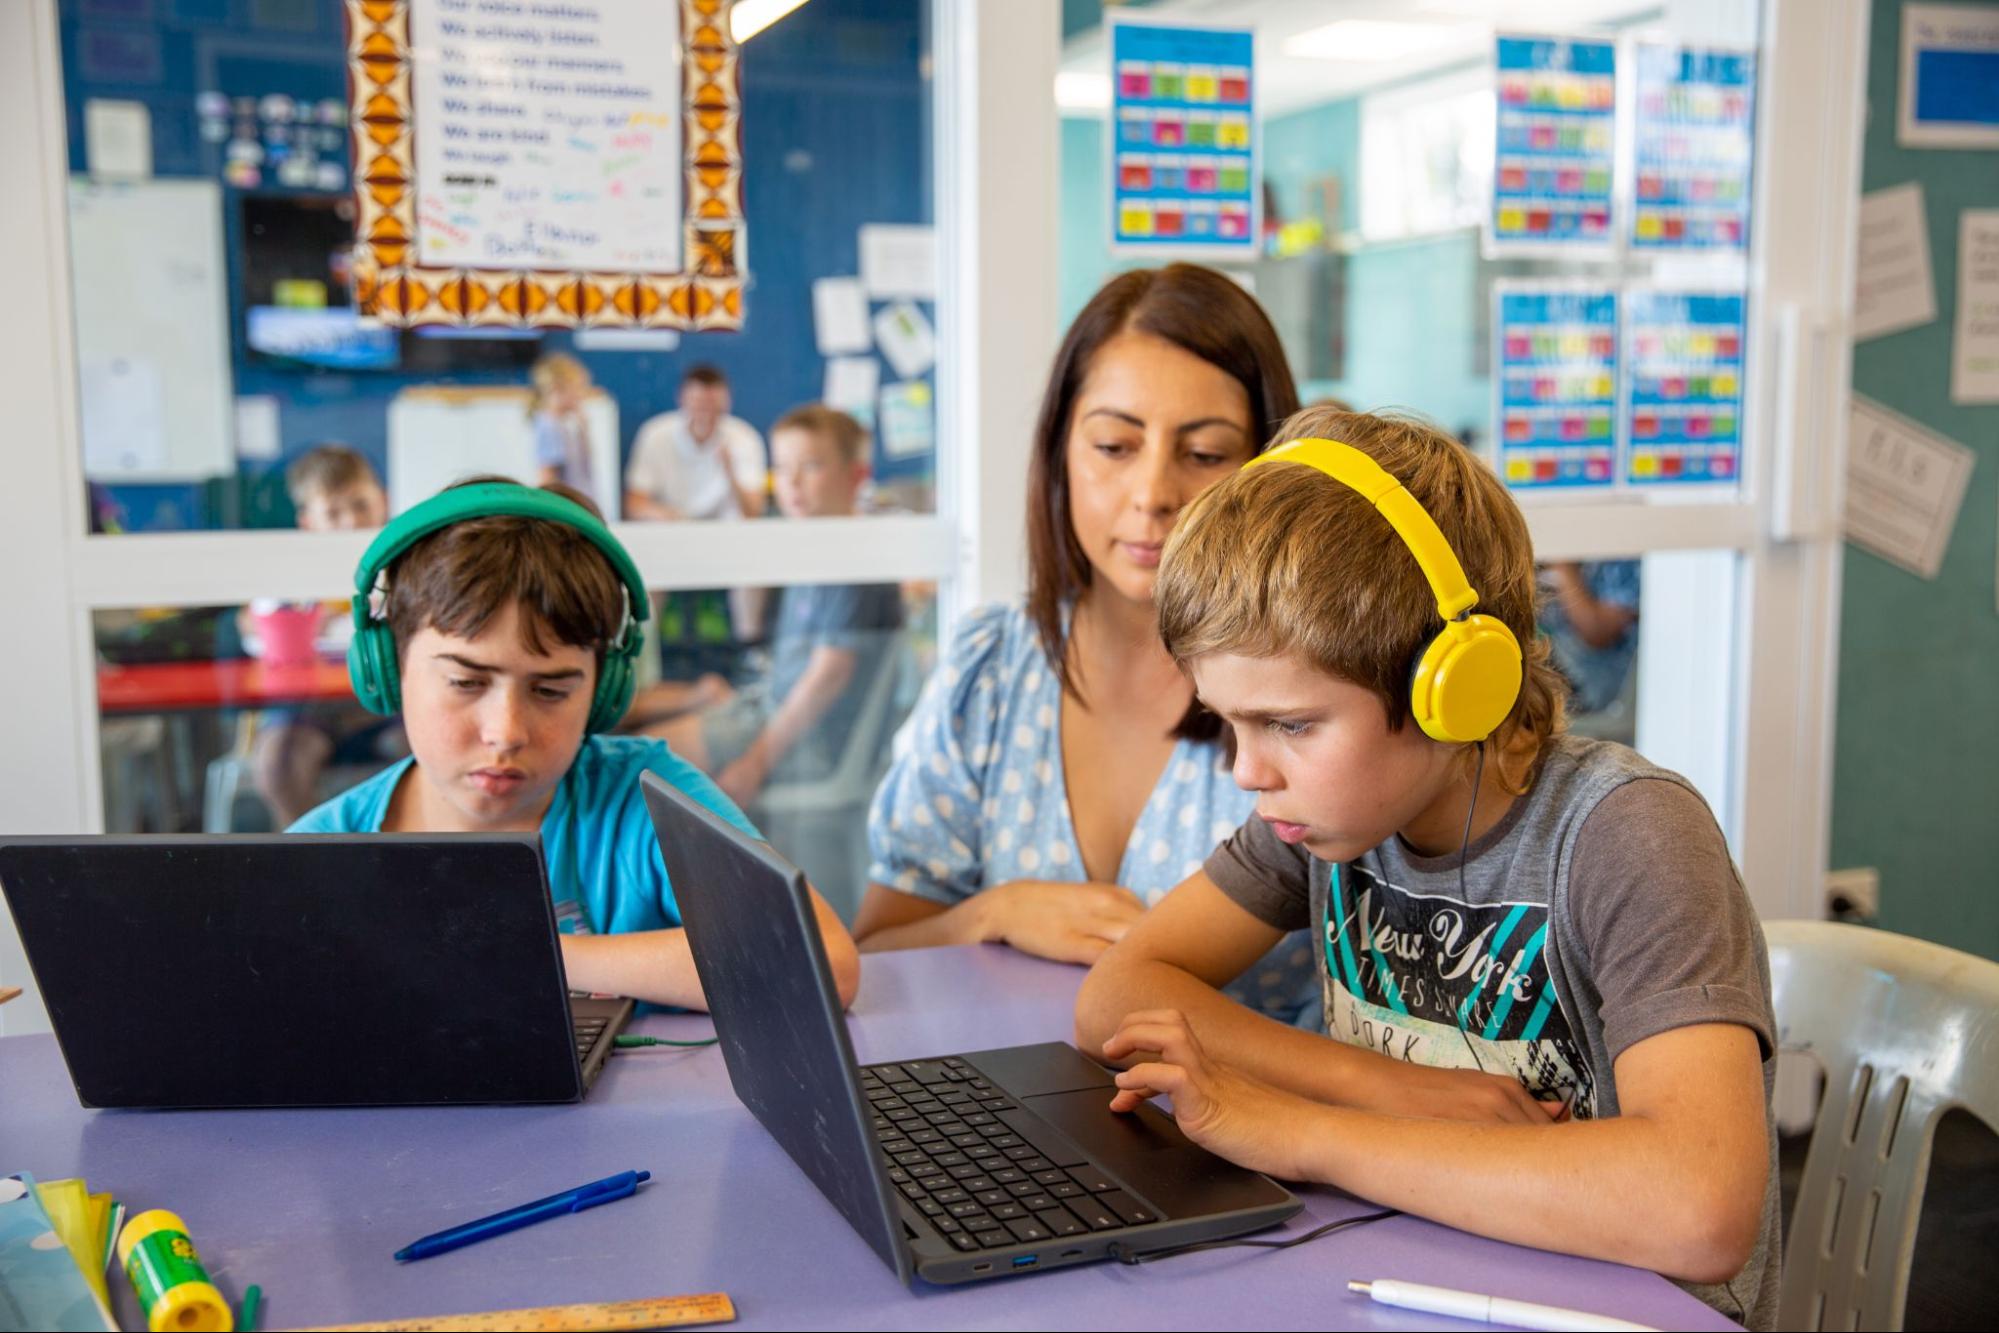 Network for Learning helps provide a more seamless and secure experience for students and educators across New Zealand (Maungaturoto Primary School)